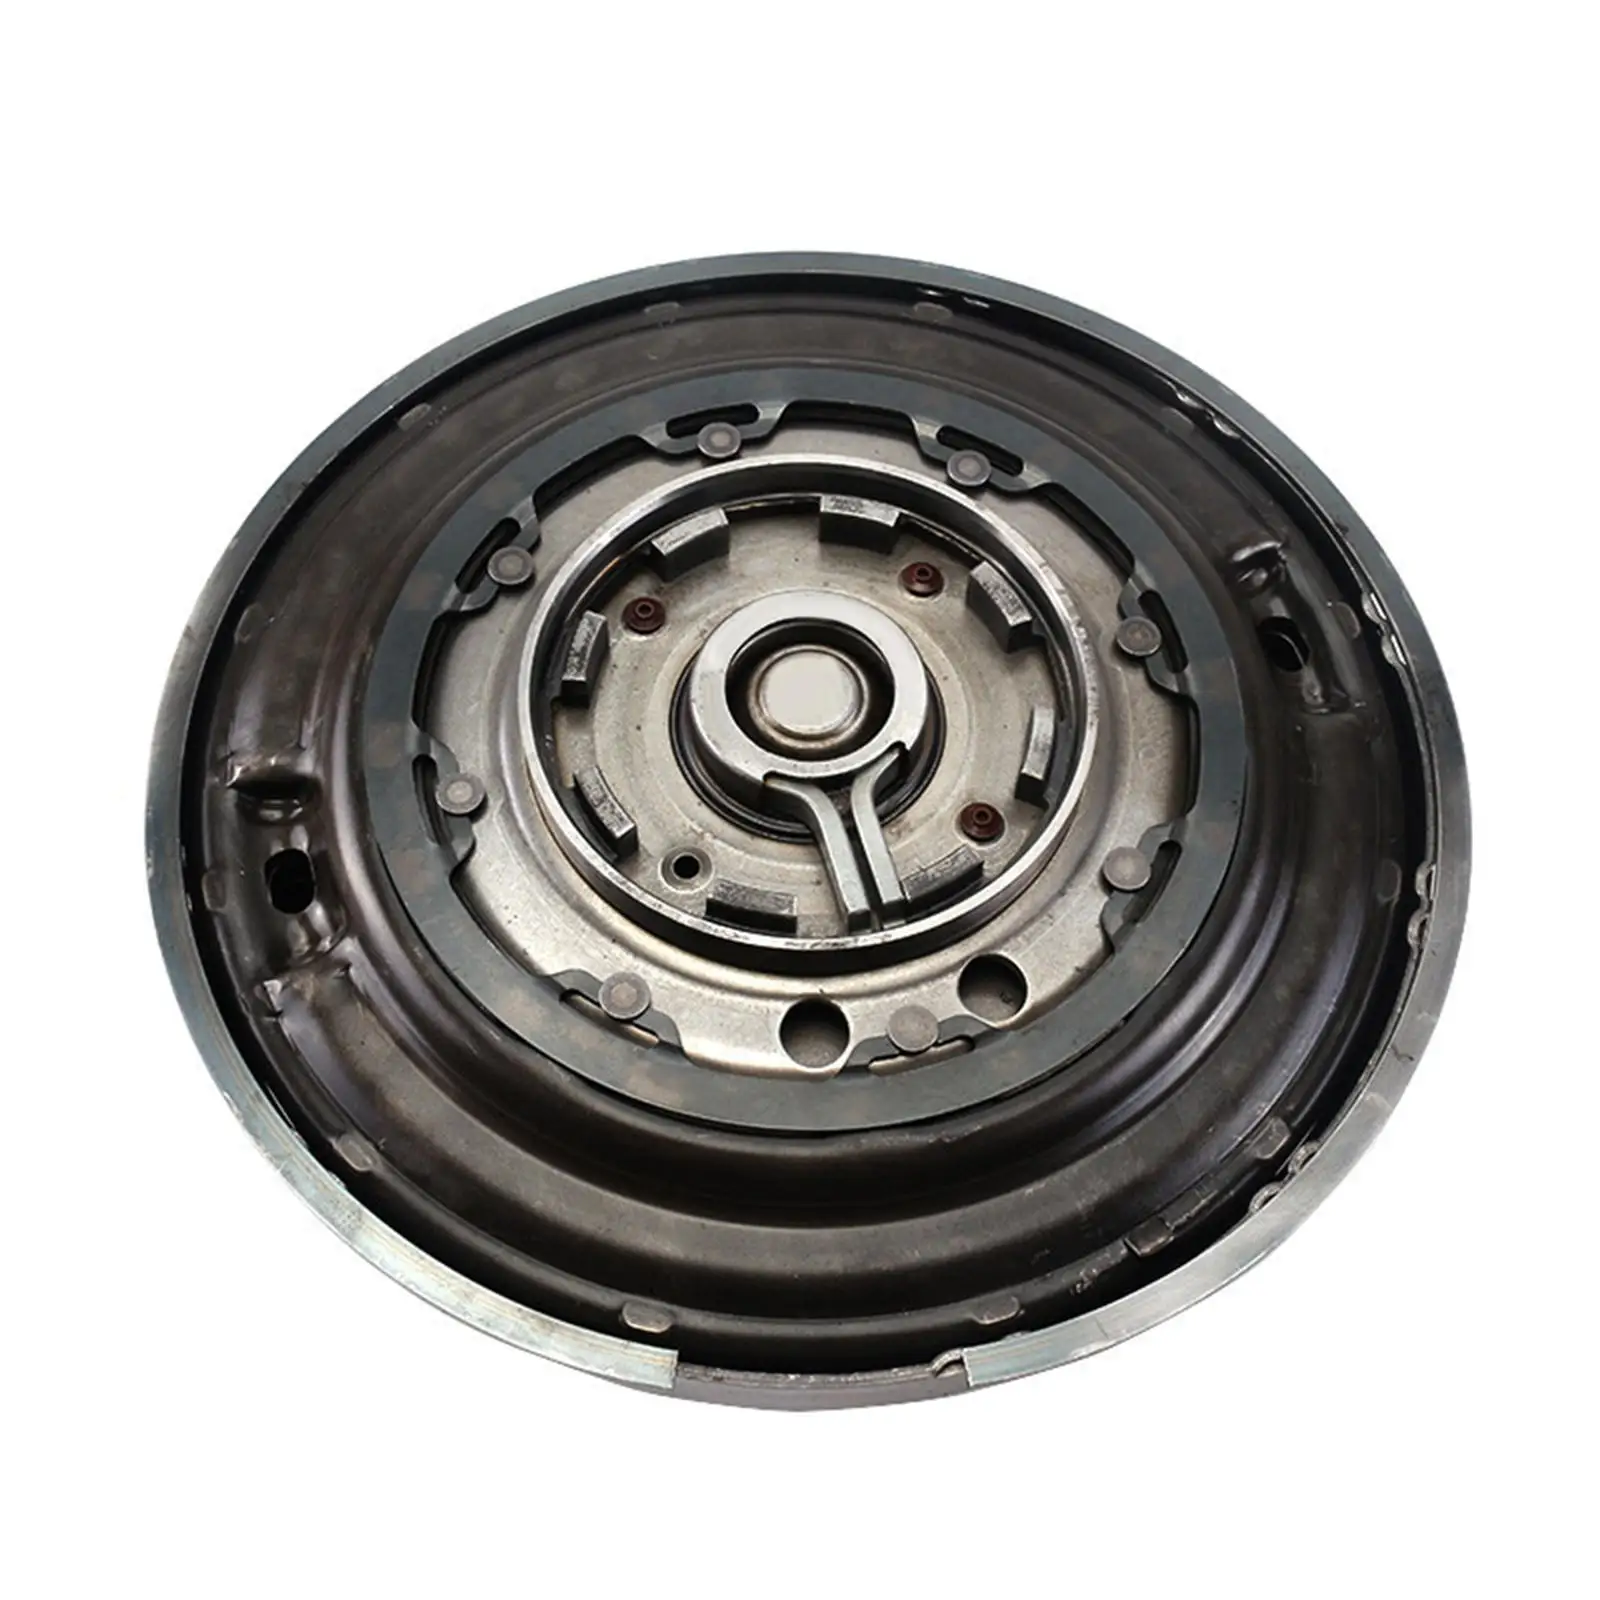 Transmission Clutch Replaces Easy to Install Practical for Ford Mondeo Focus